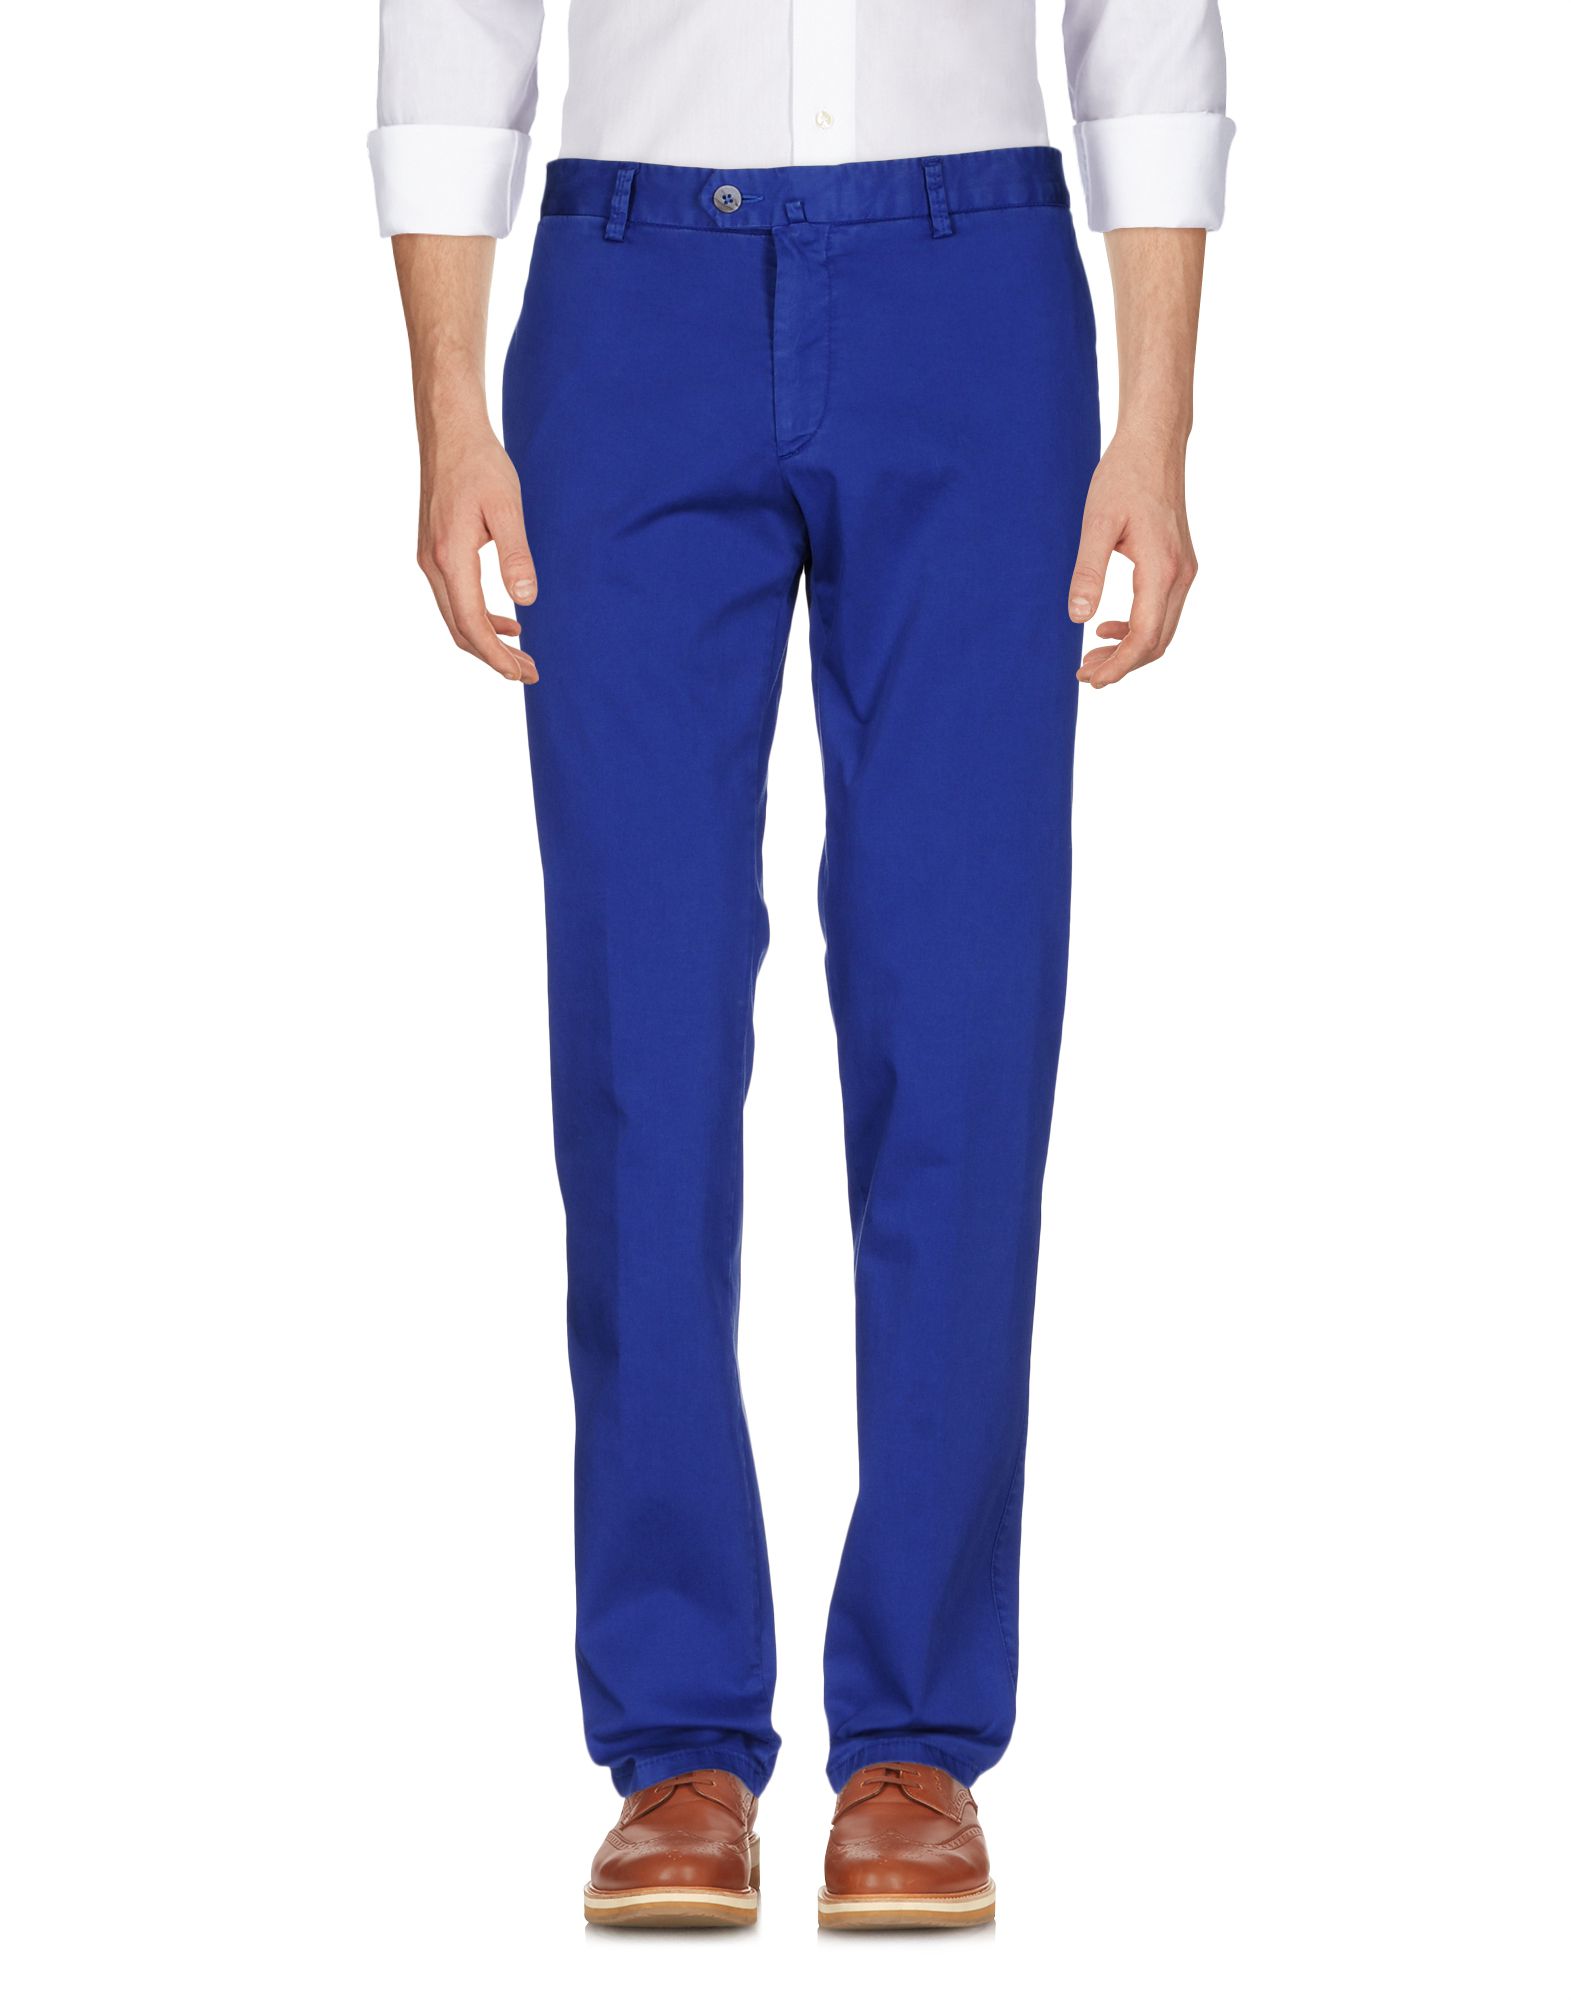 X PER X PER Casual pants from yoox.com | Daily Mail